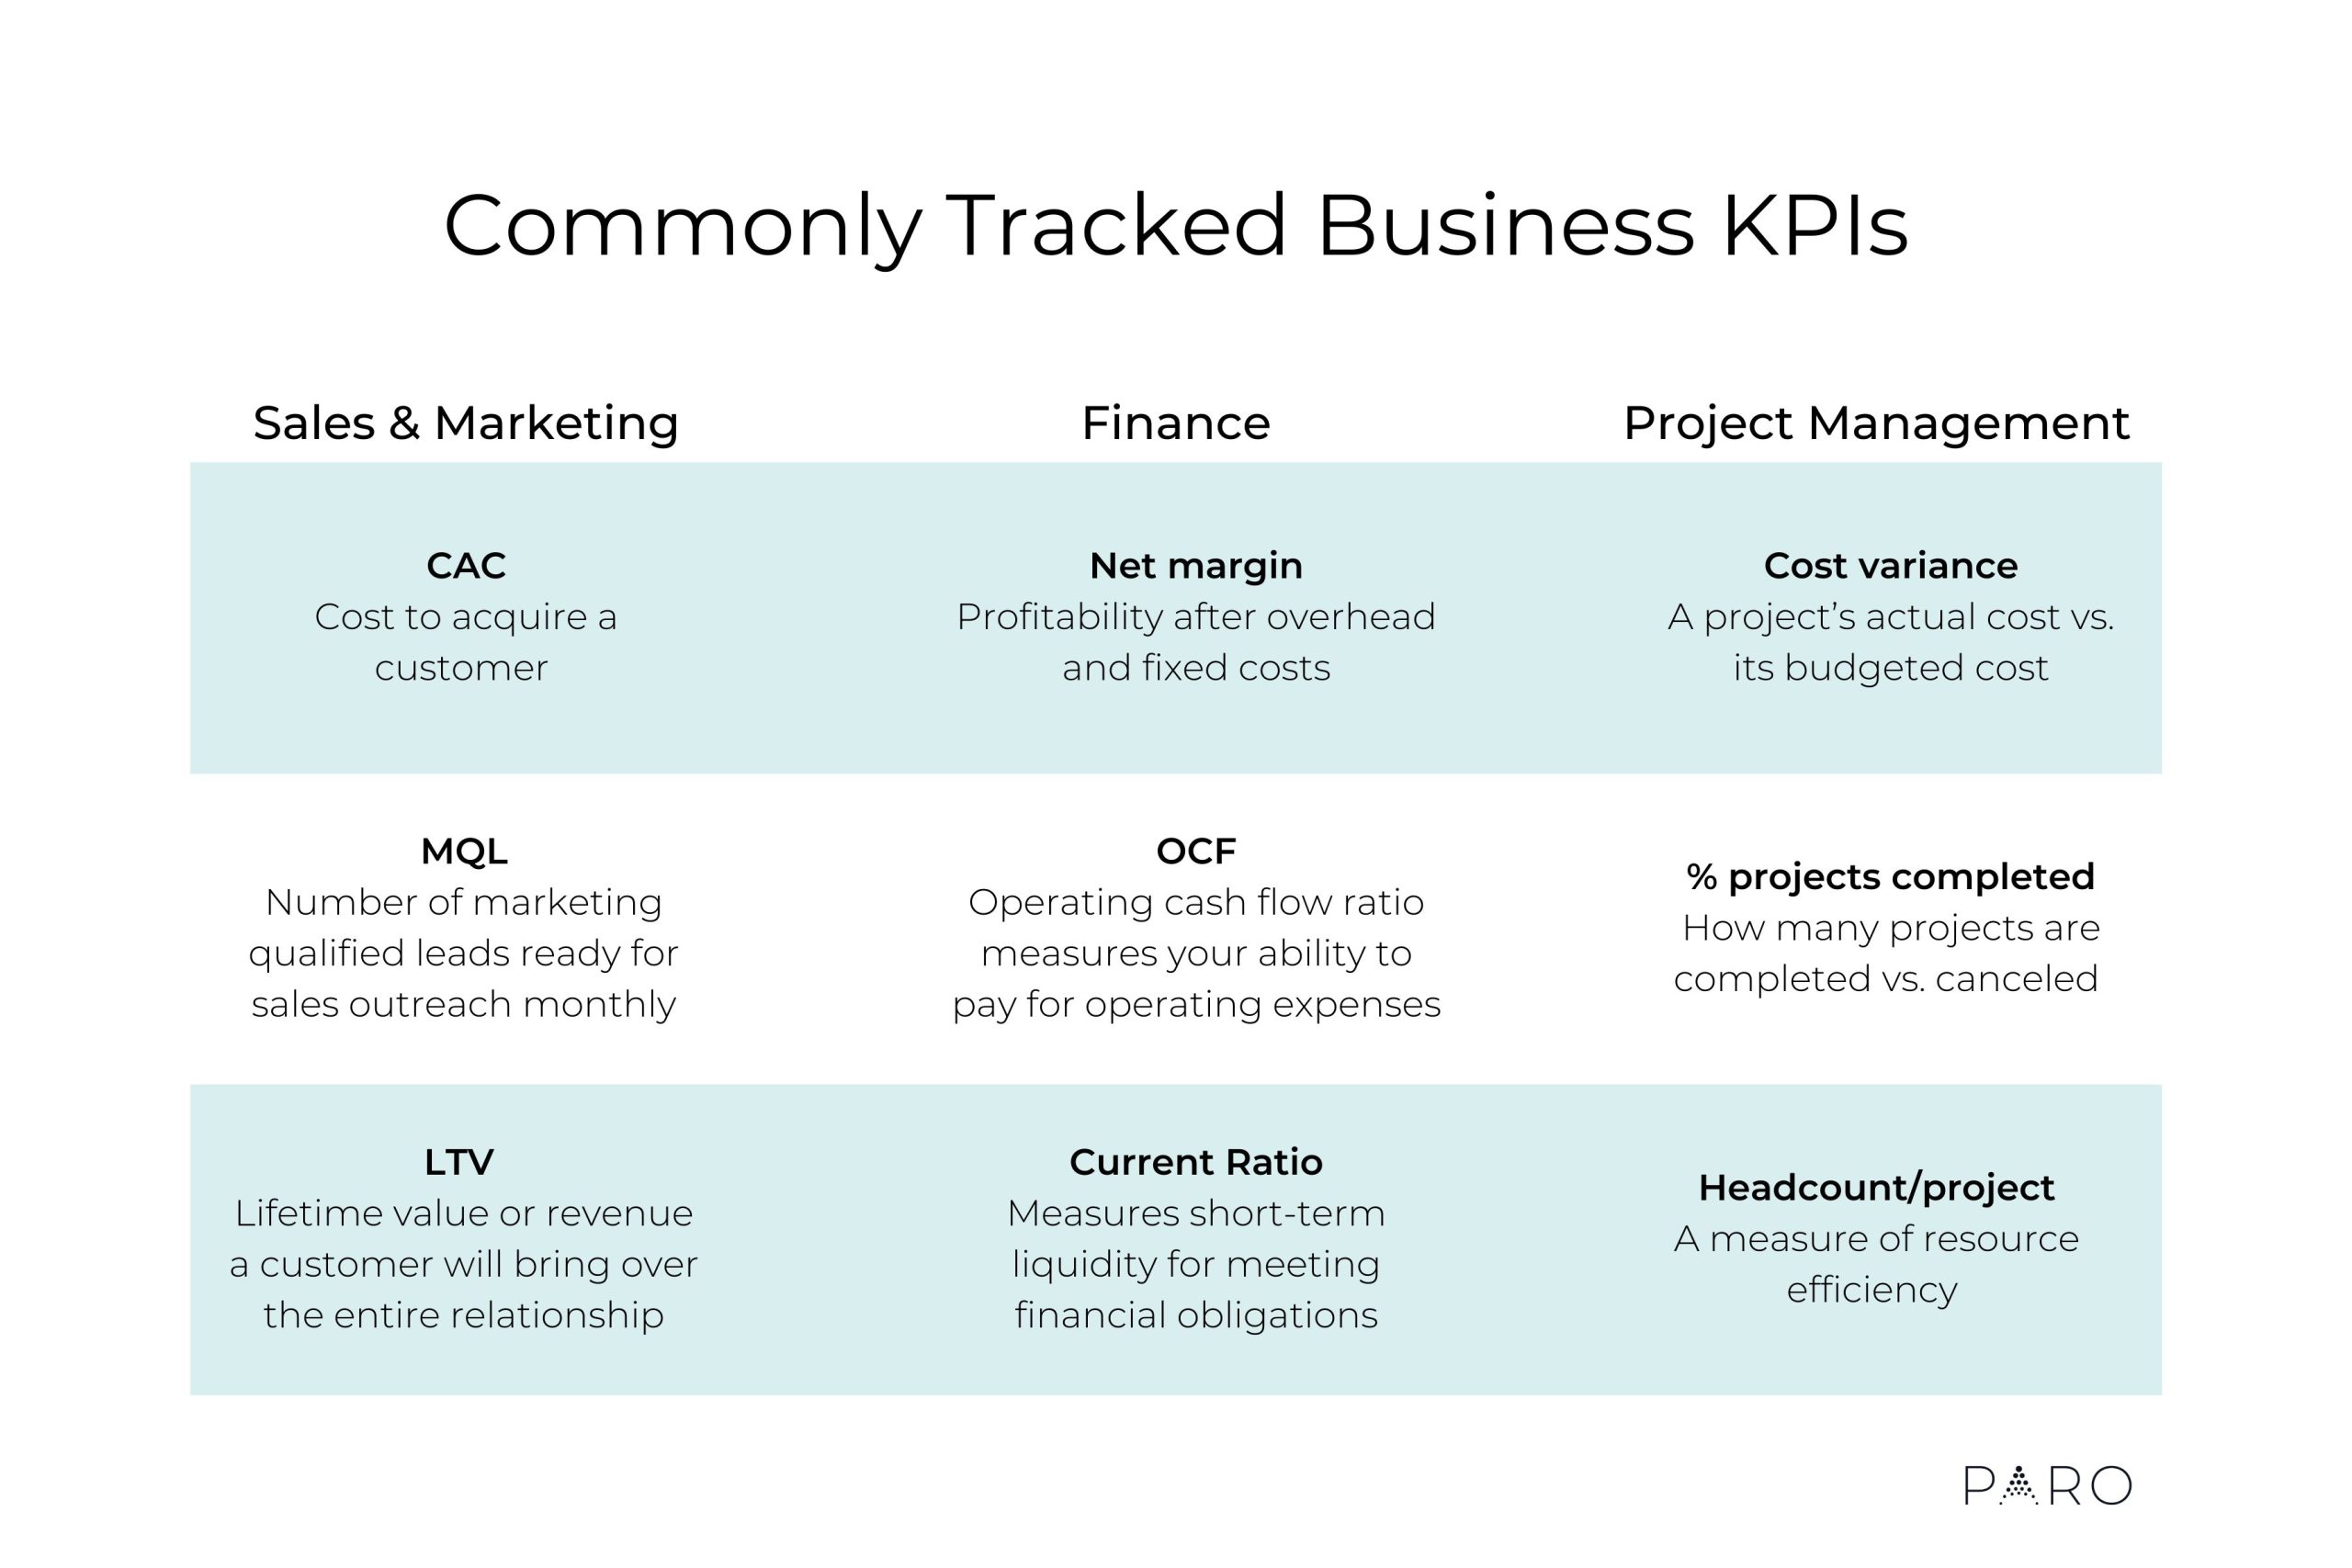 How to Develop Actionable KPIs & Harness Business Metrics